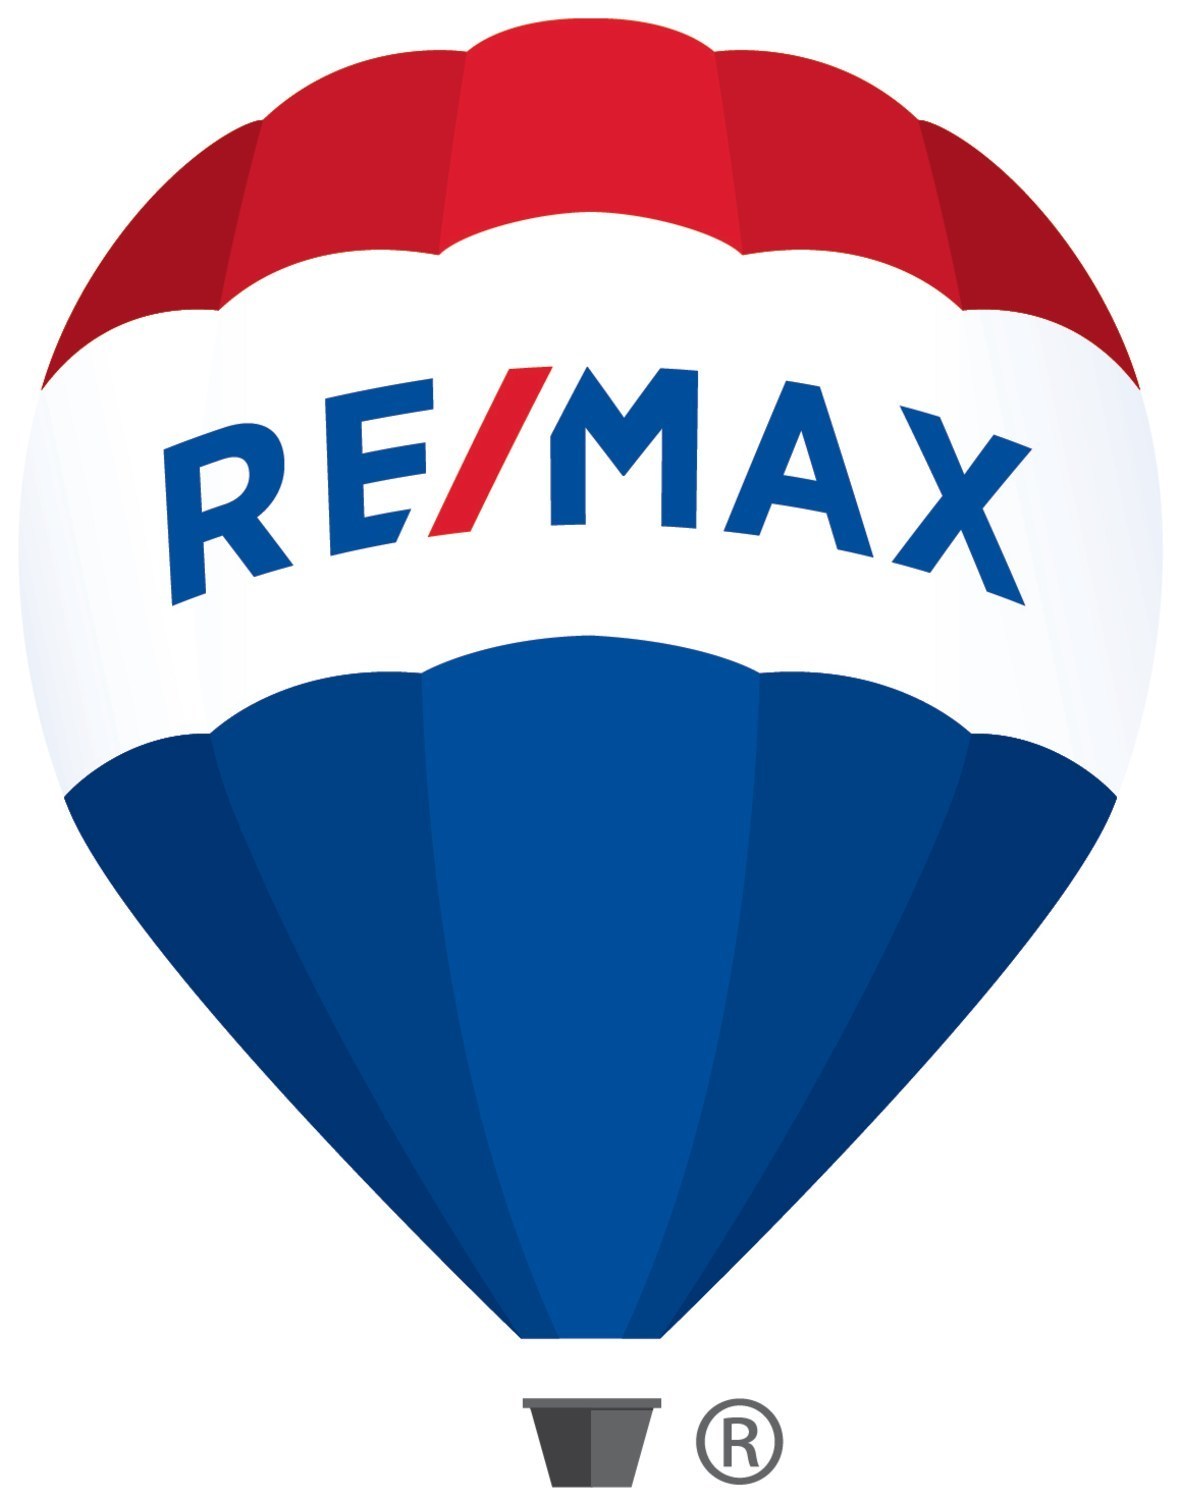 RE/MAX National Housing Report for May 2022